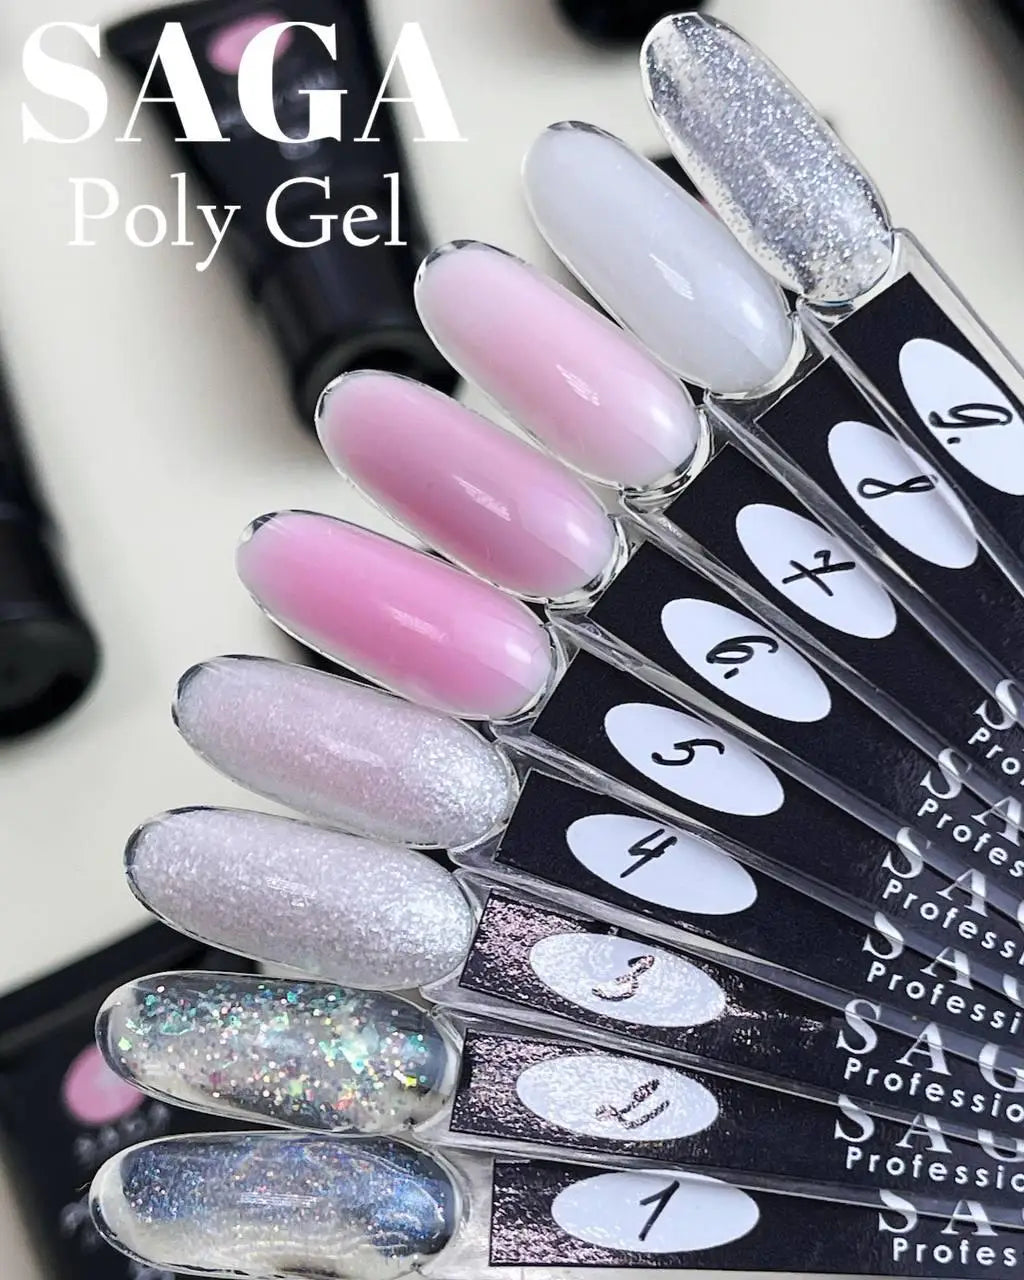 Poly-gel Saga Exclusive No. 1, 30 ml (transparent with shimmer)